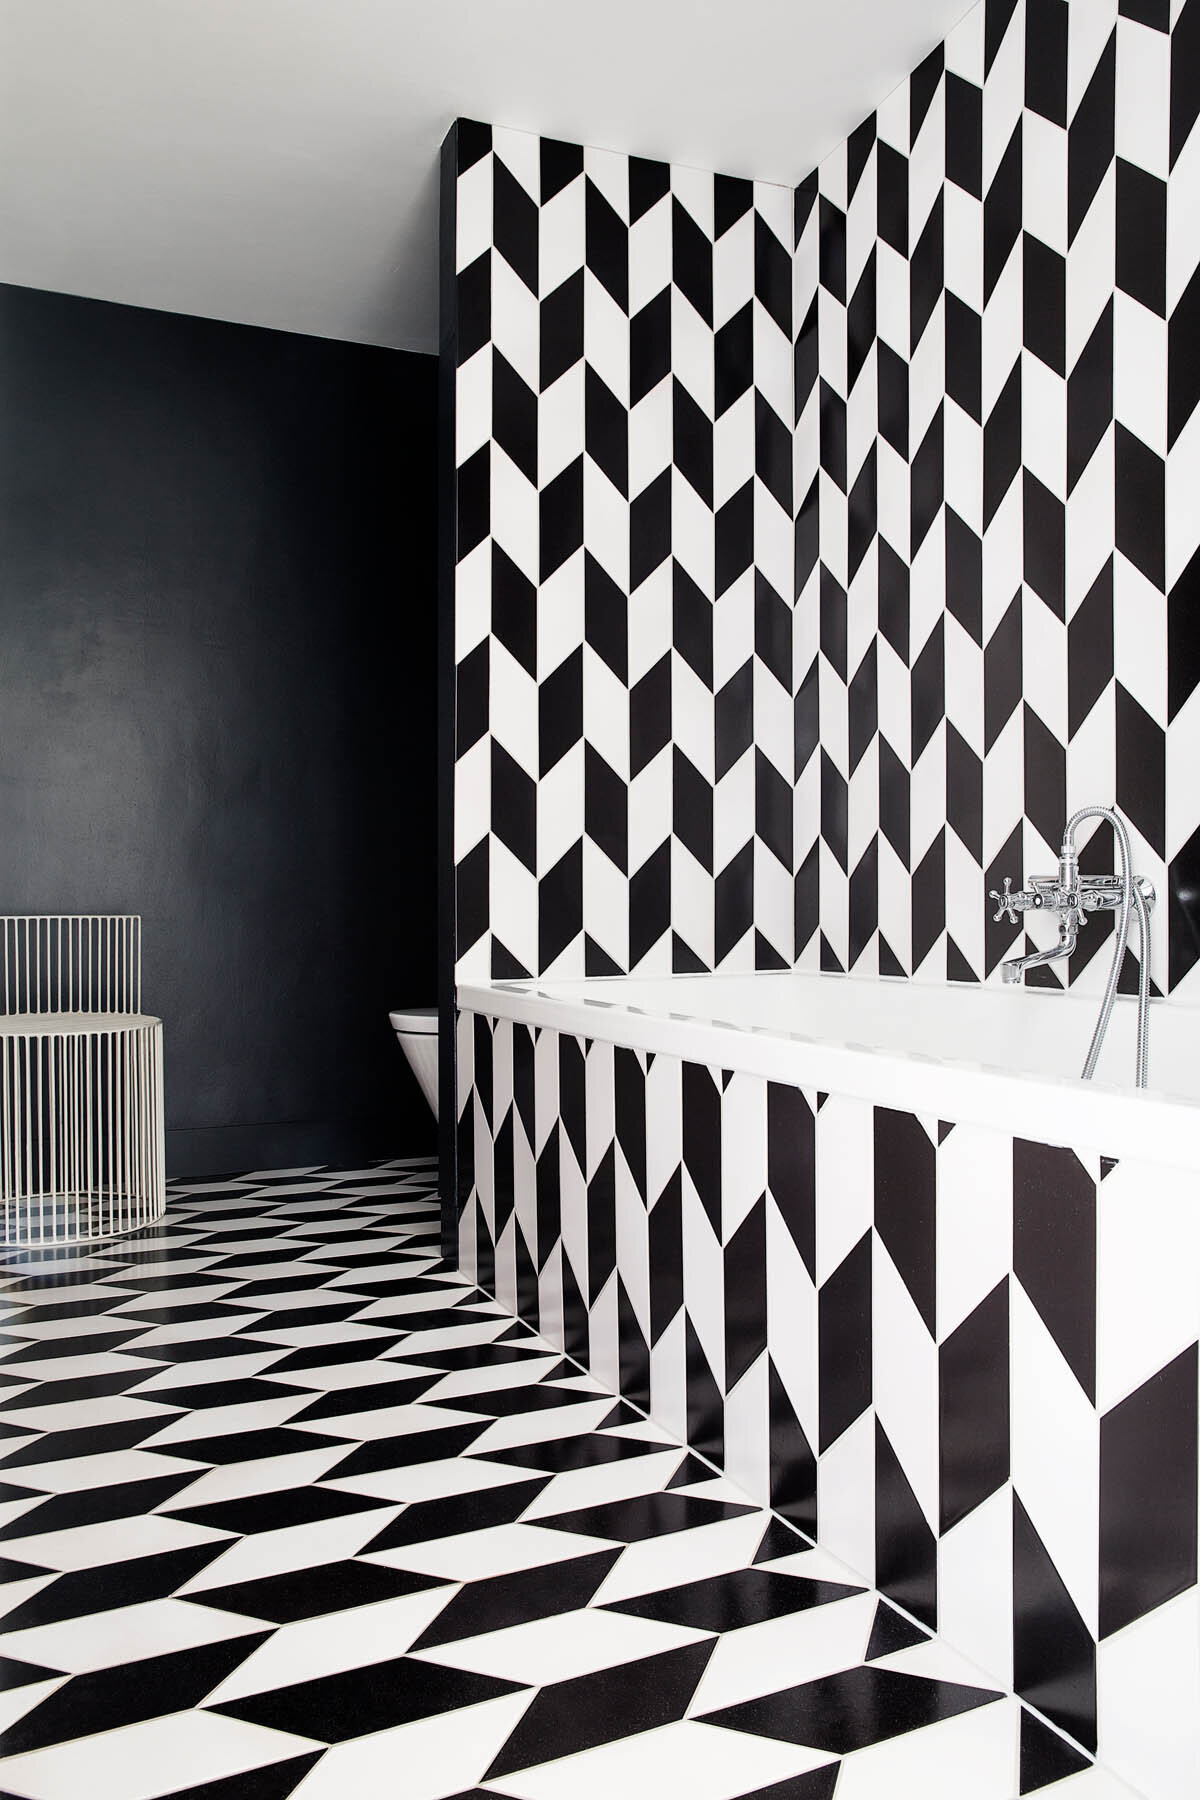 Bathroom floor and wall with clay tiles in chevron patchwork glazed with 'White Tail Matt' 